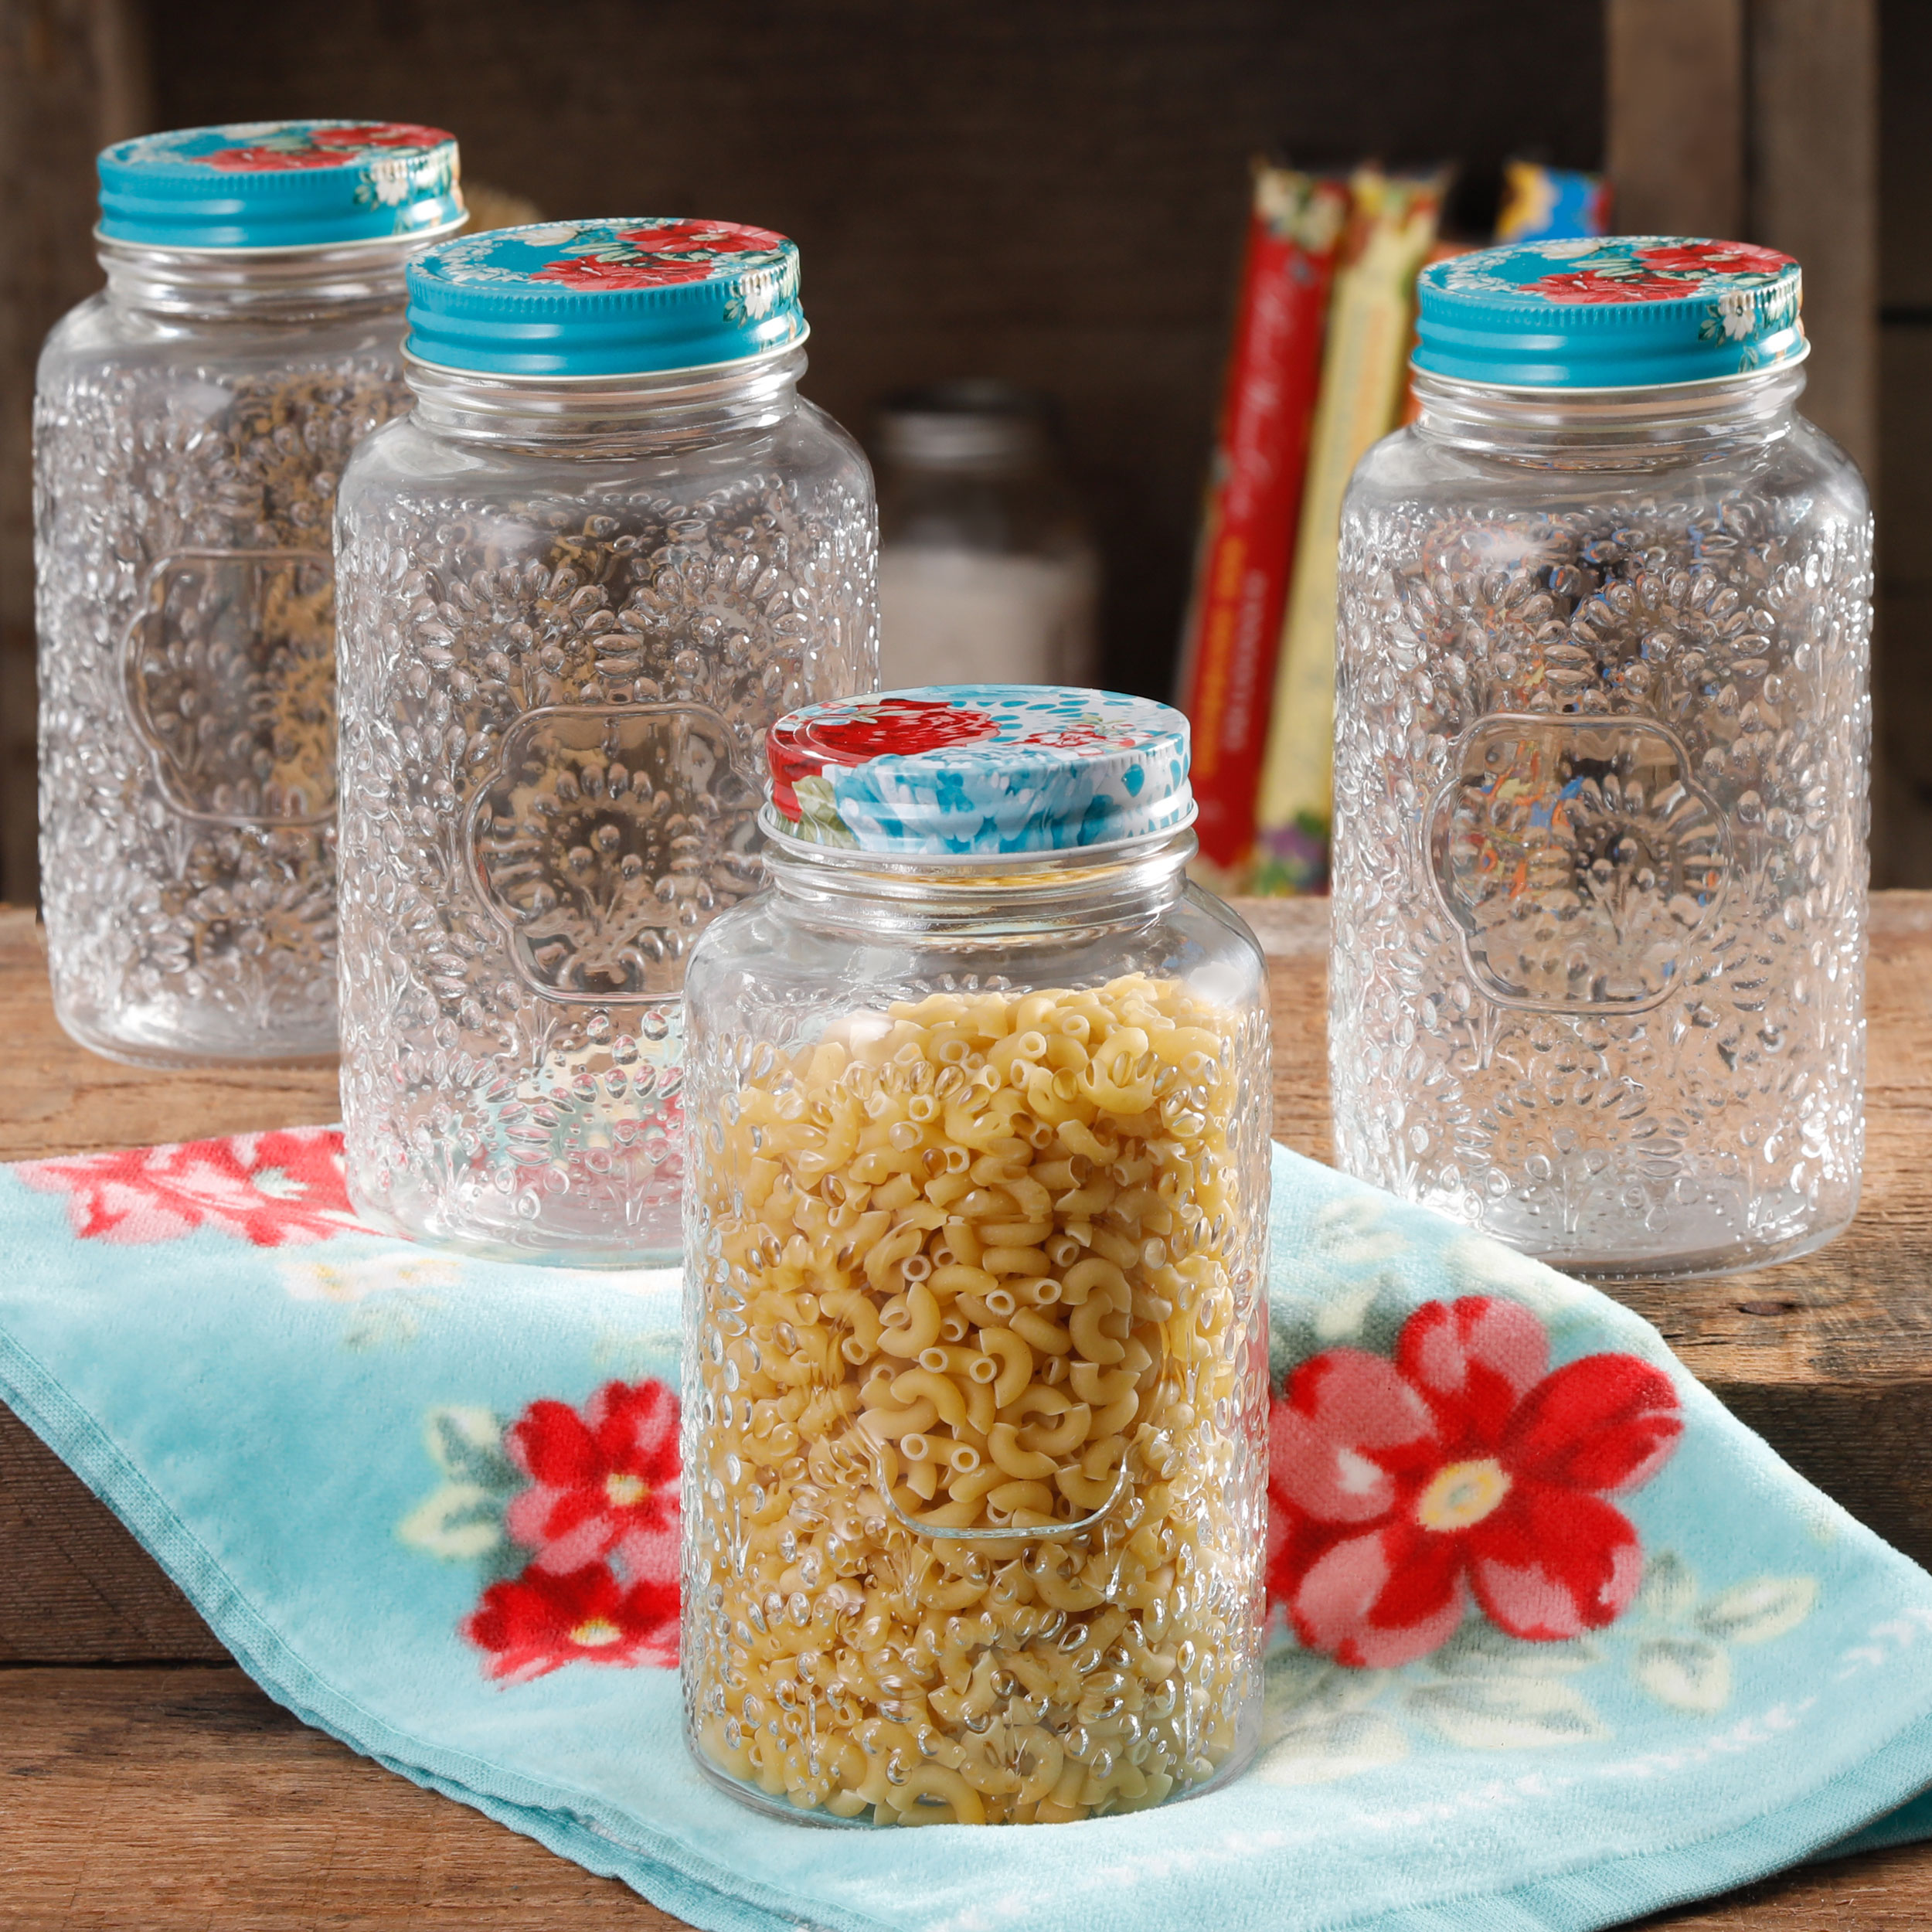 The Pioneer Woman Betsy Set of 4, 32-Ounce Glass Storage Jars with Lids - image 1 of 3